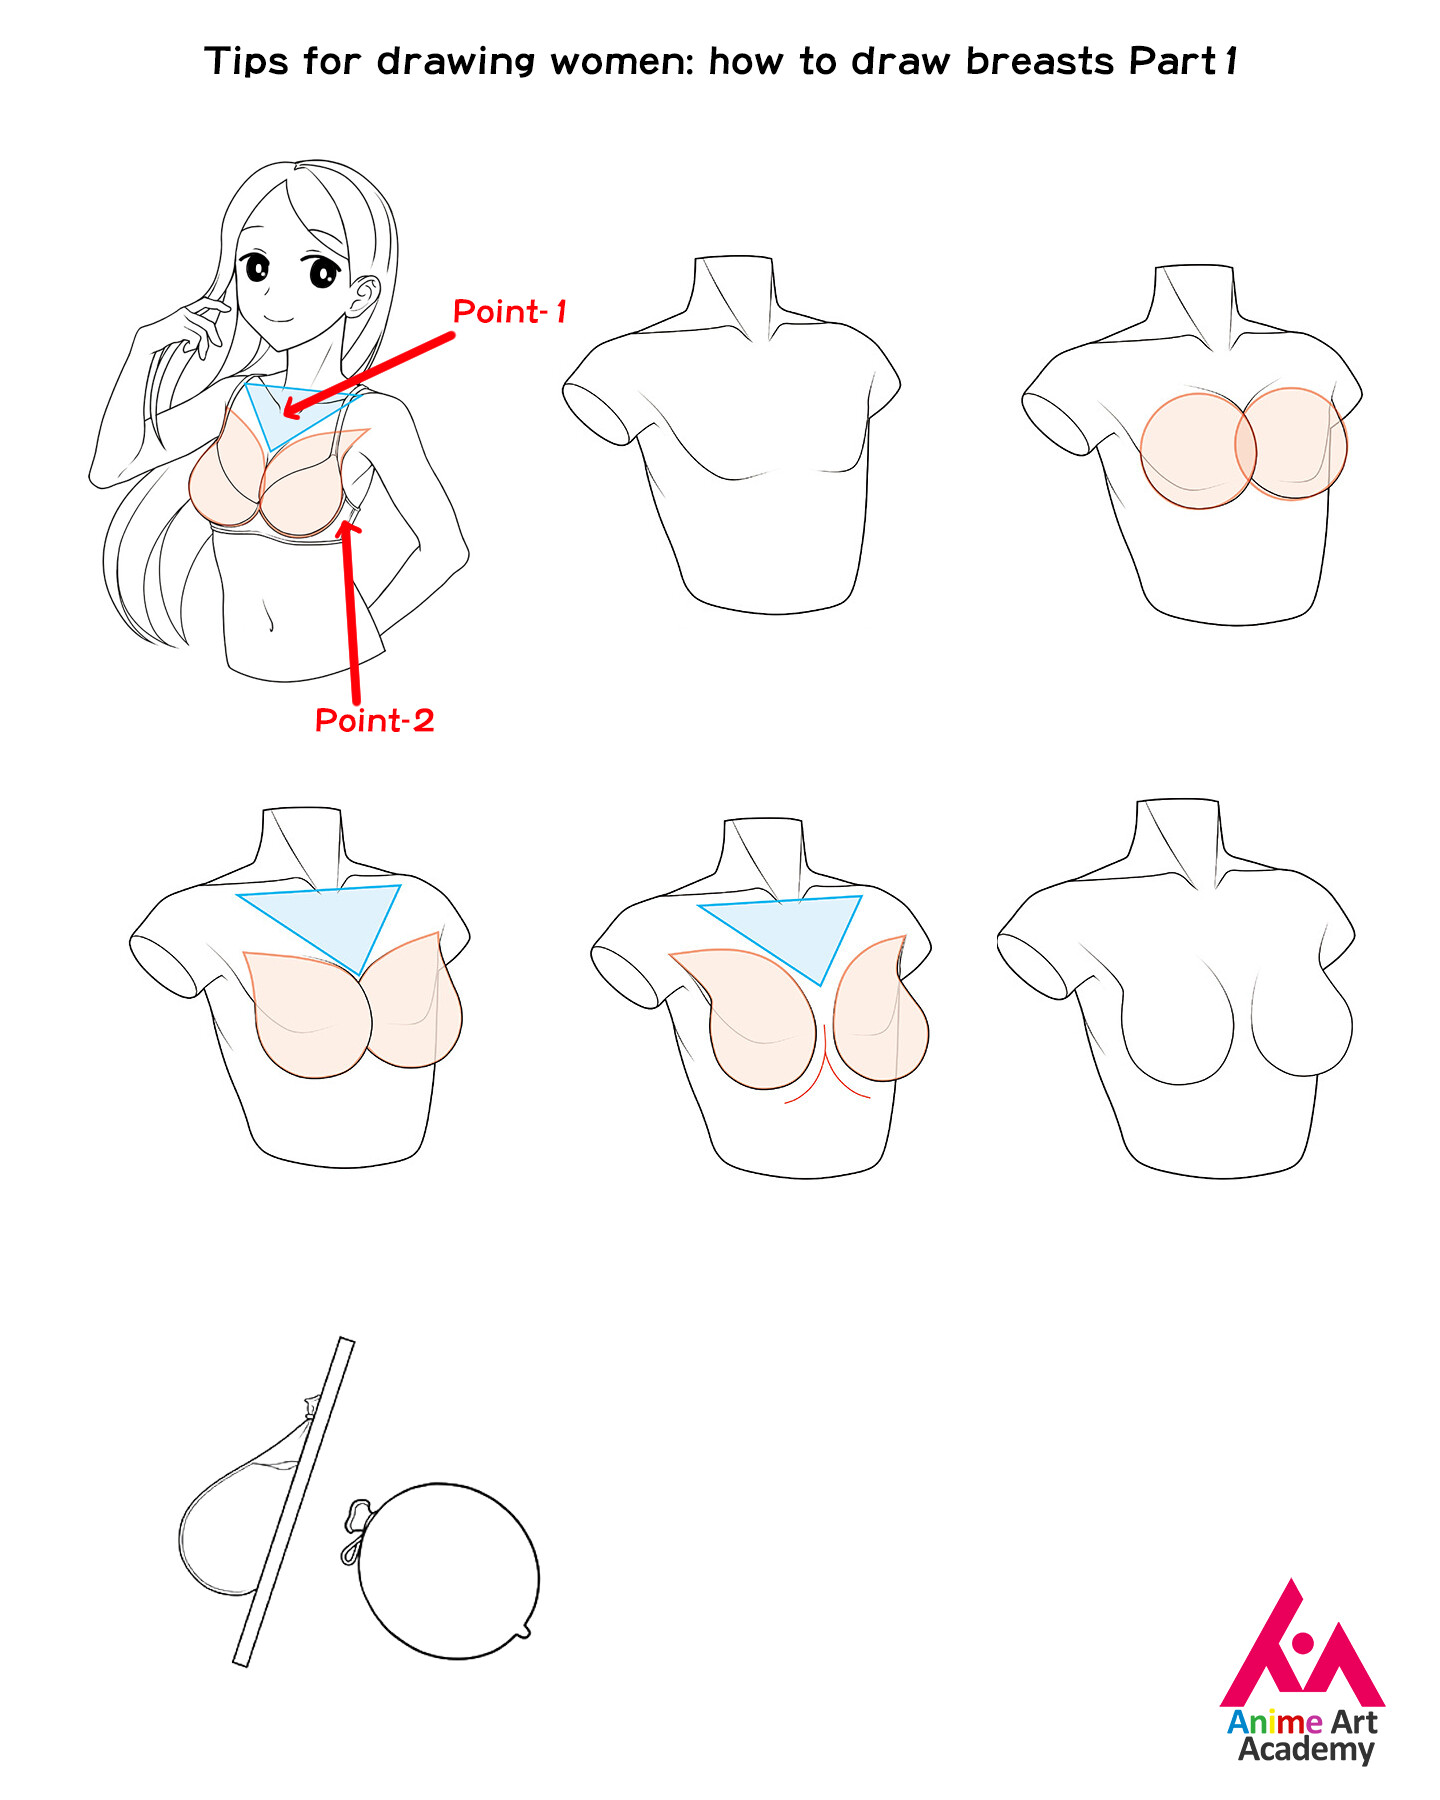 ArtStation - Tips for drawing women: how to draw breasts Part1